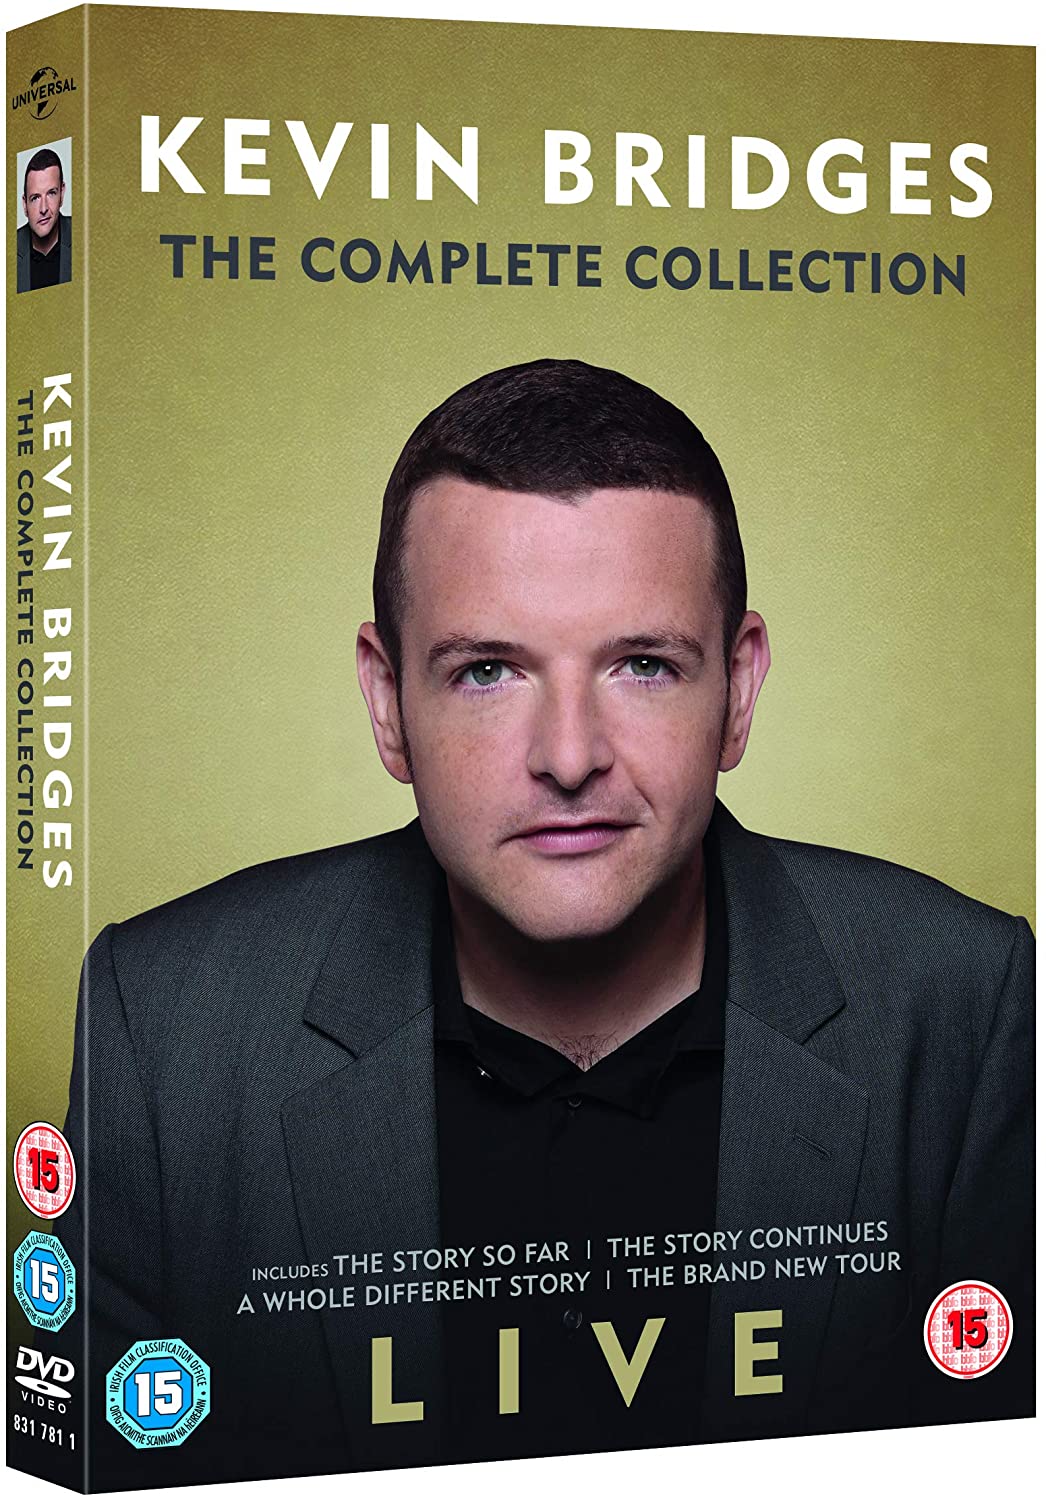 Kevin Bridges: The Complete Collection (DVD)